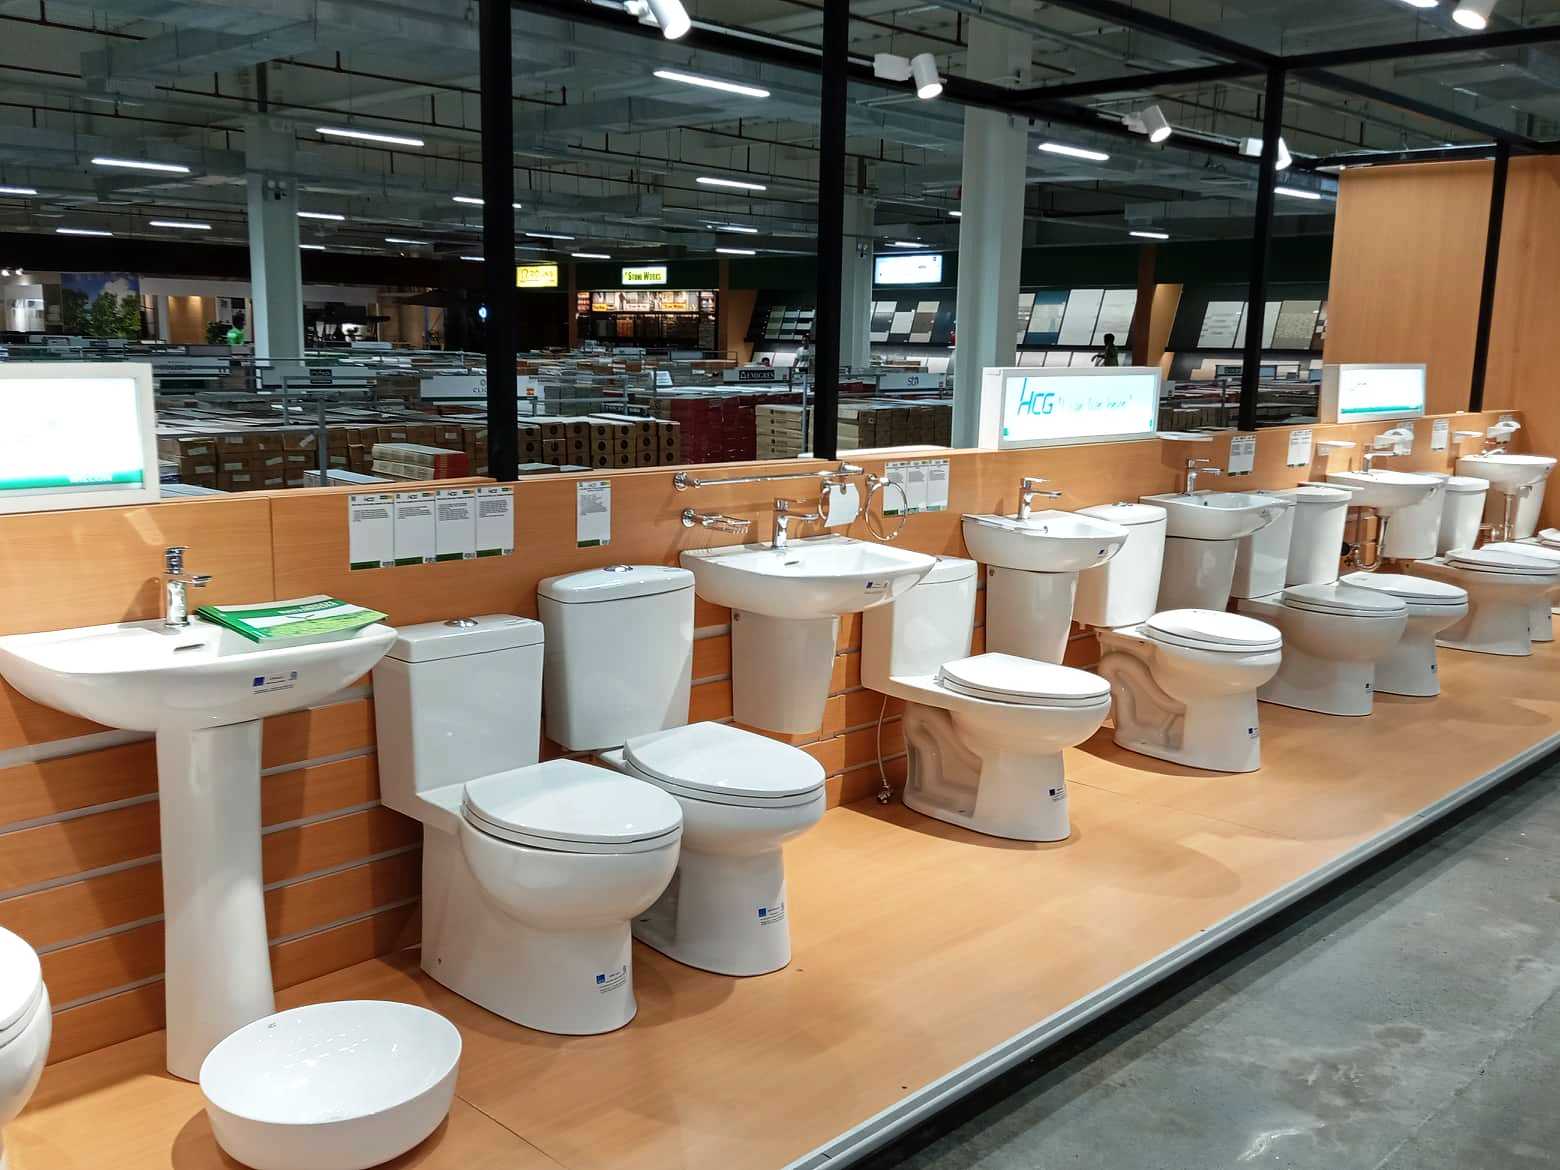 Individual items and packages can be purchased through the store. From wash basins, to water closets, to faucets, HCG’s Showroom is complete for every preference for the home.